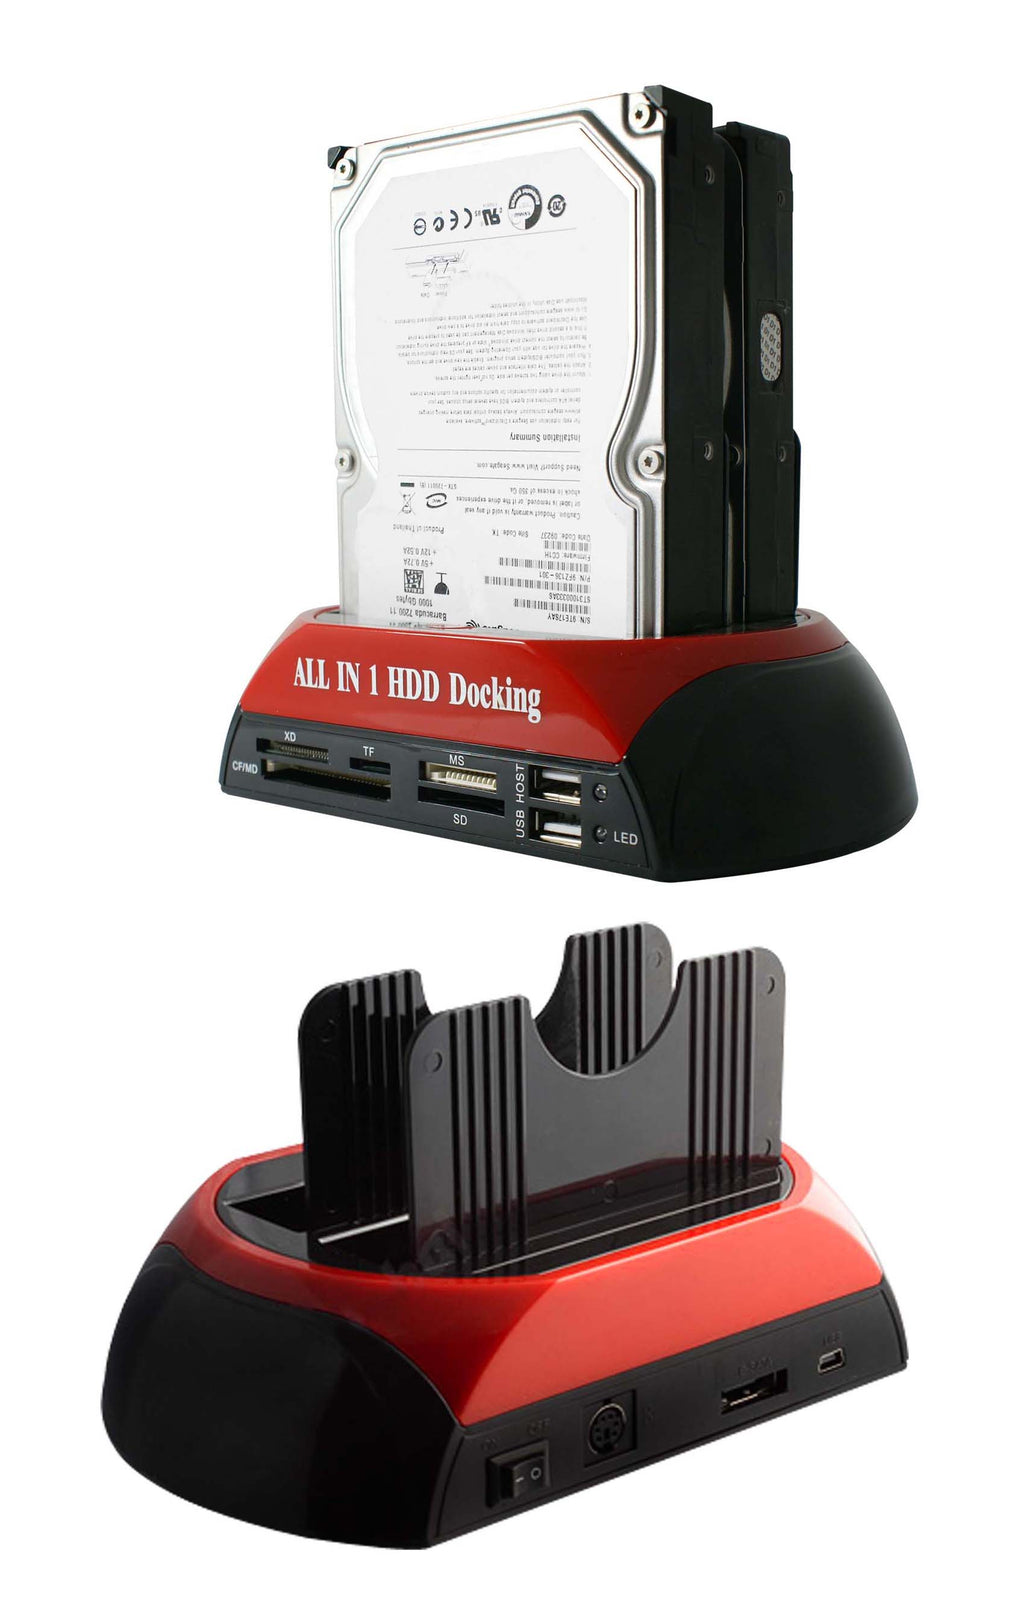 All in 1 Hard Drive Docking Station USB 2.5 3.5 SATA Dual IDE HDD Disk  Dock